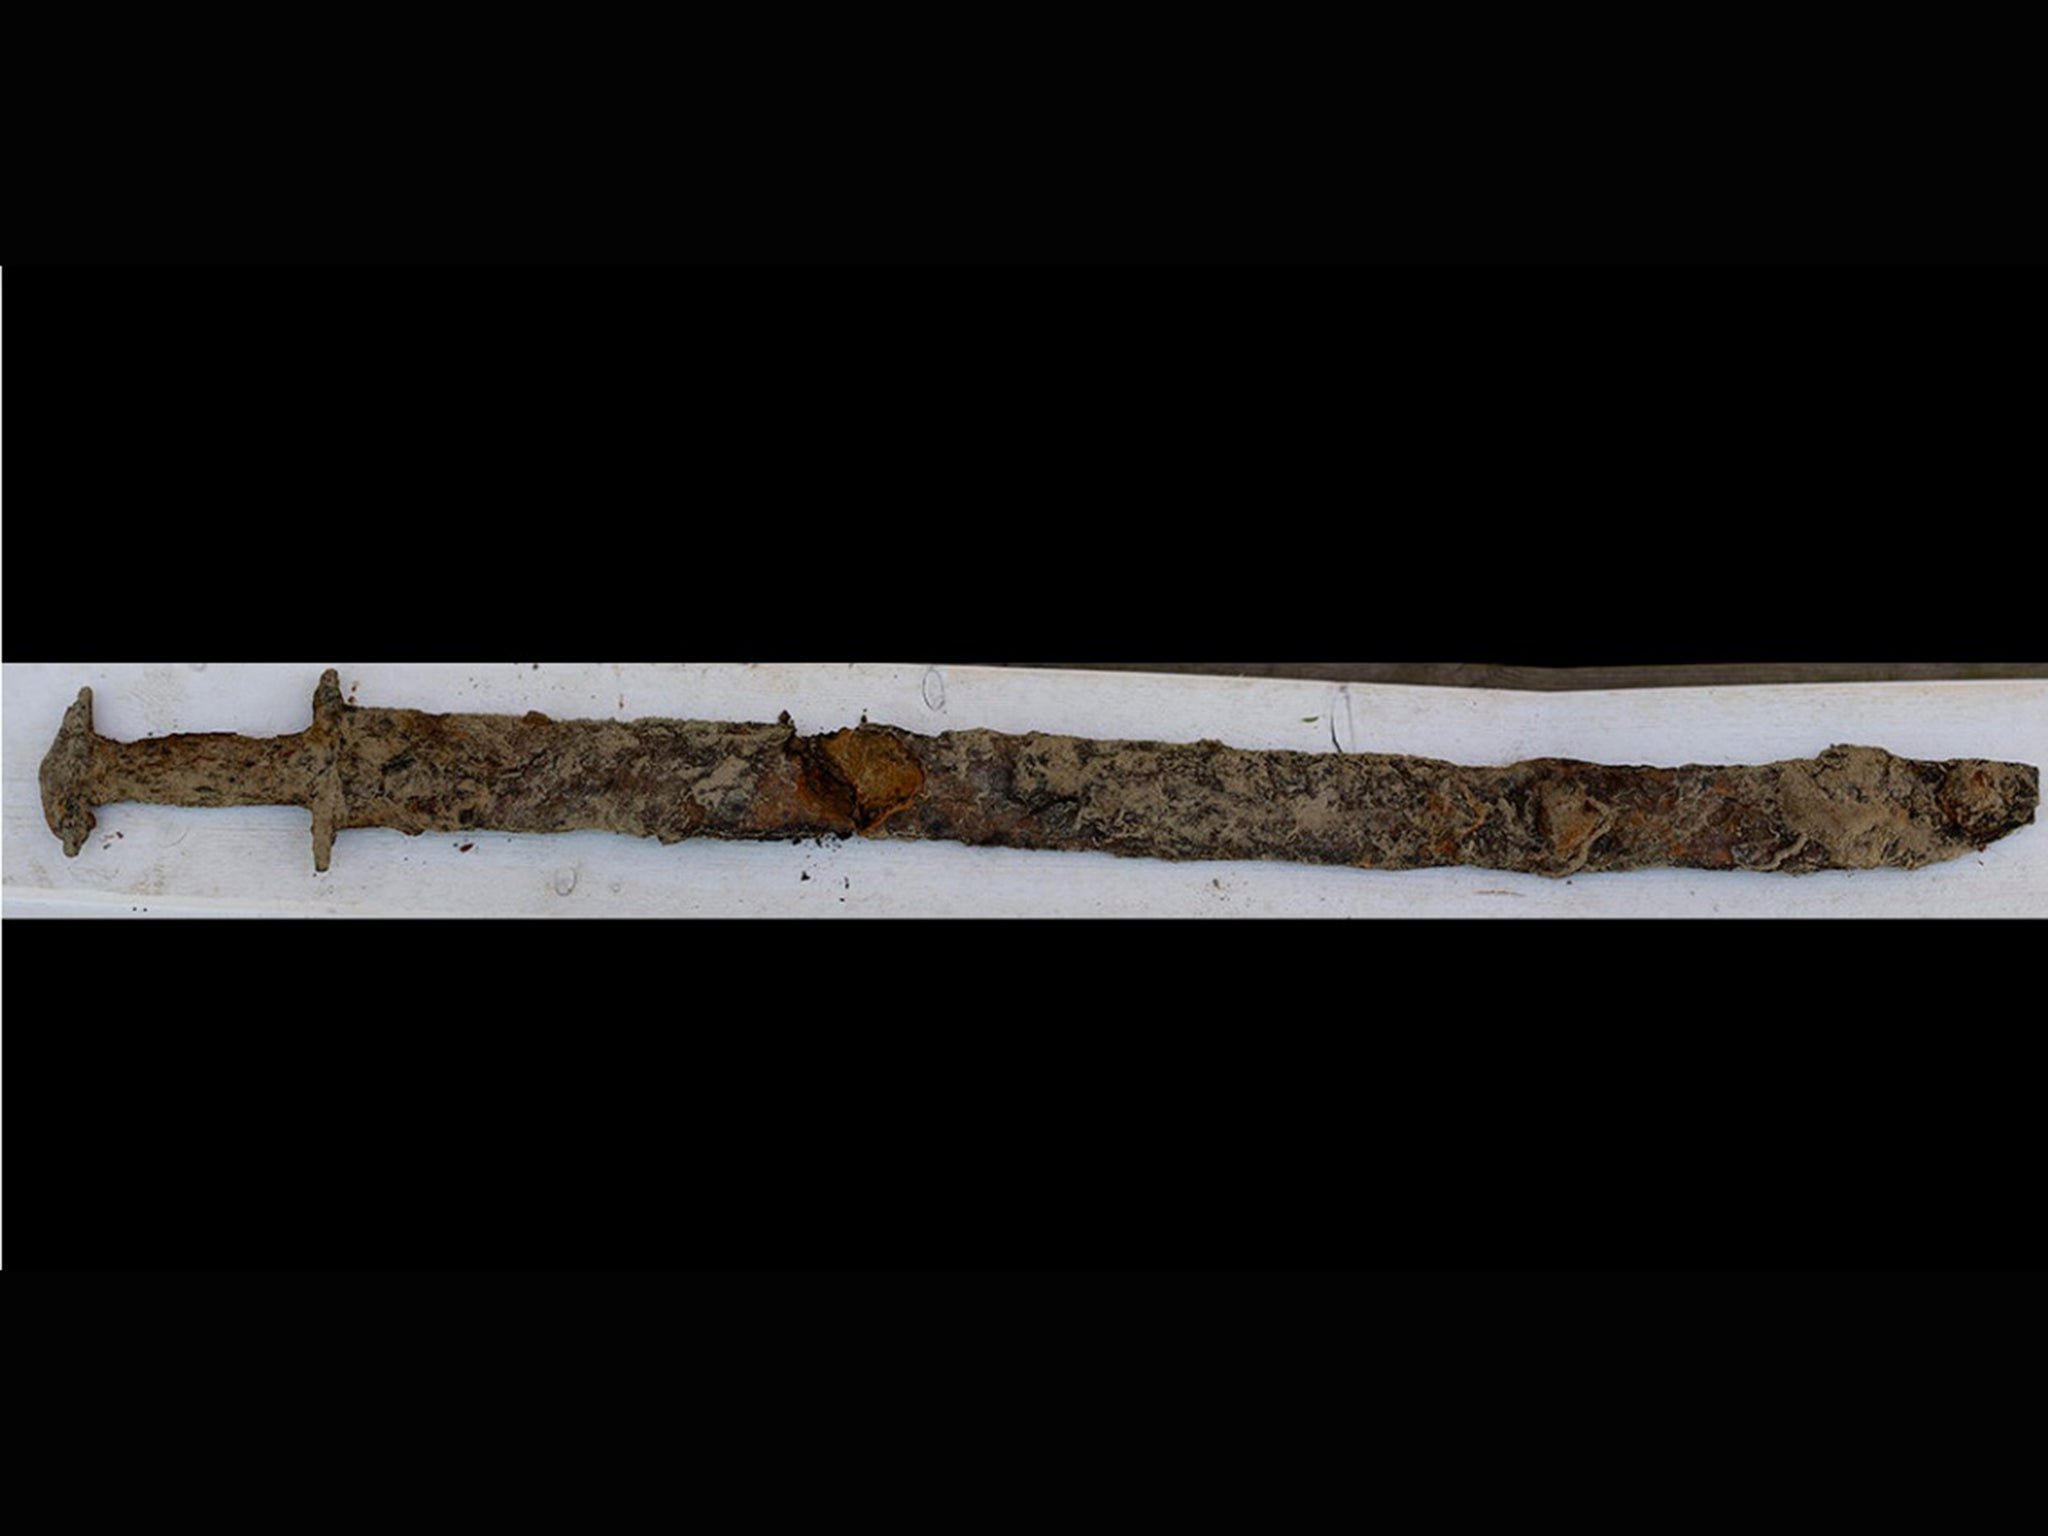 The sword was found in Vidostern lake